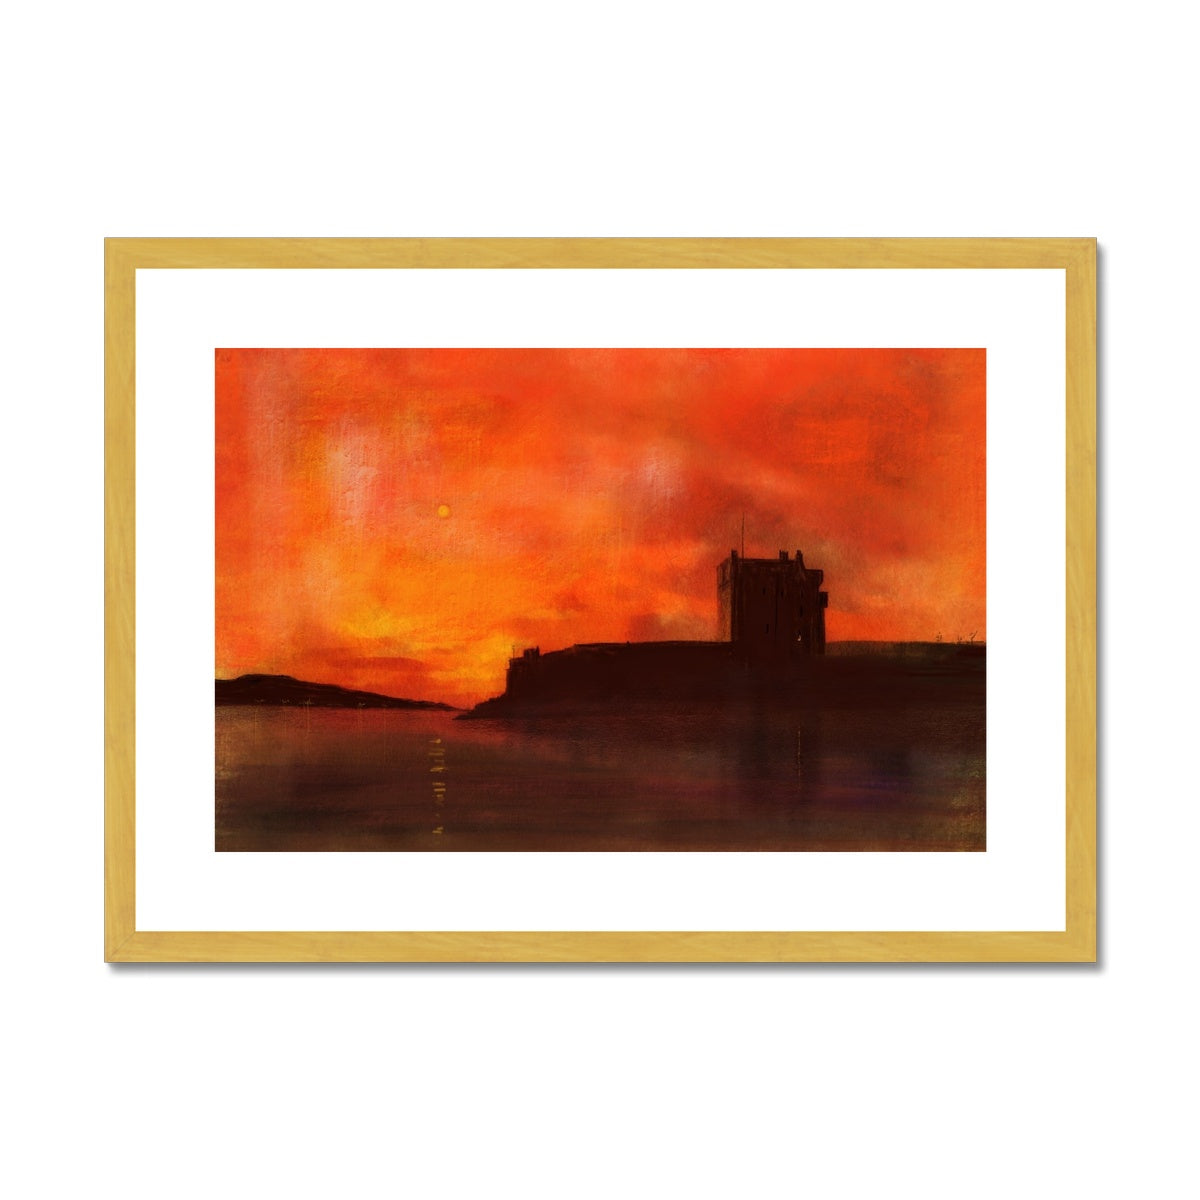 Broughty Castle Sunset Painting | Antique Framed & Mounted Prints From Scotland-Antique Framed & Mounted Prints-Scottish Castles Art Gallery-A2 Landscape-Gold Frame-Paintings, Prints, Homeware, Art Gifts From Scotland By Scottish Artist Kevin Hunter